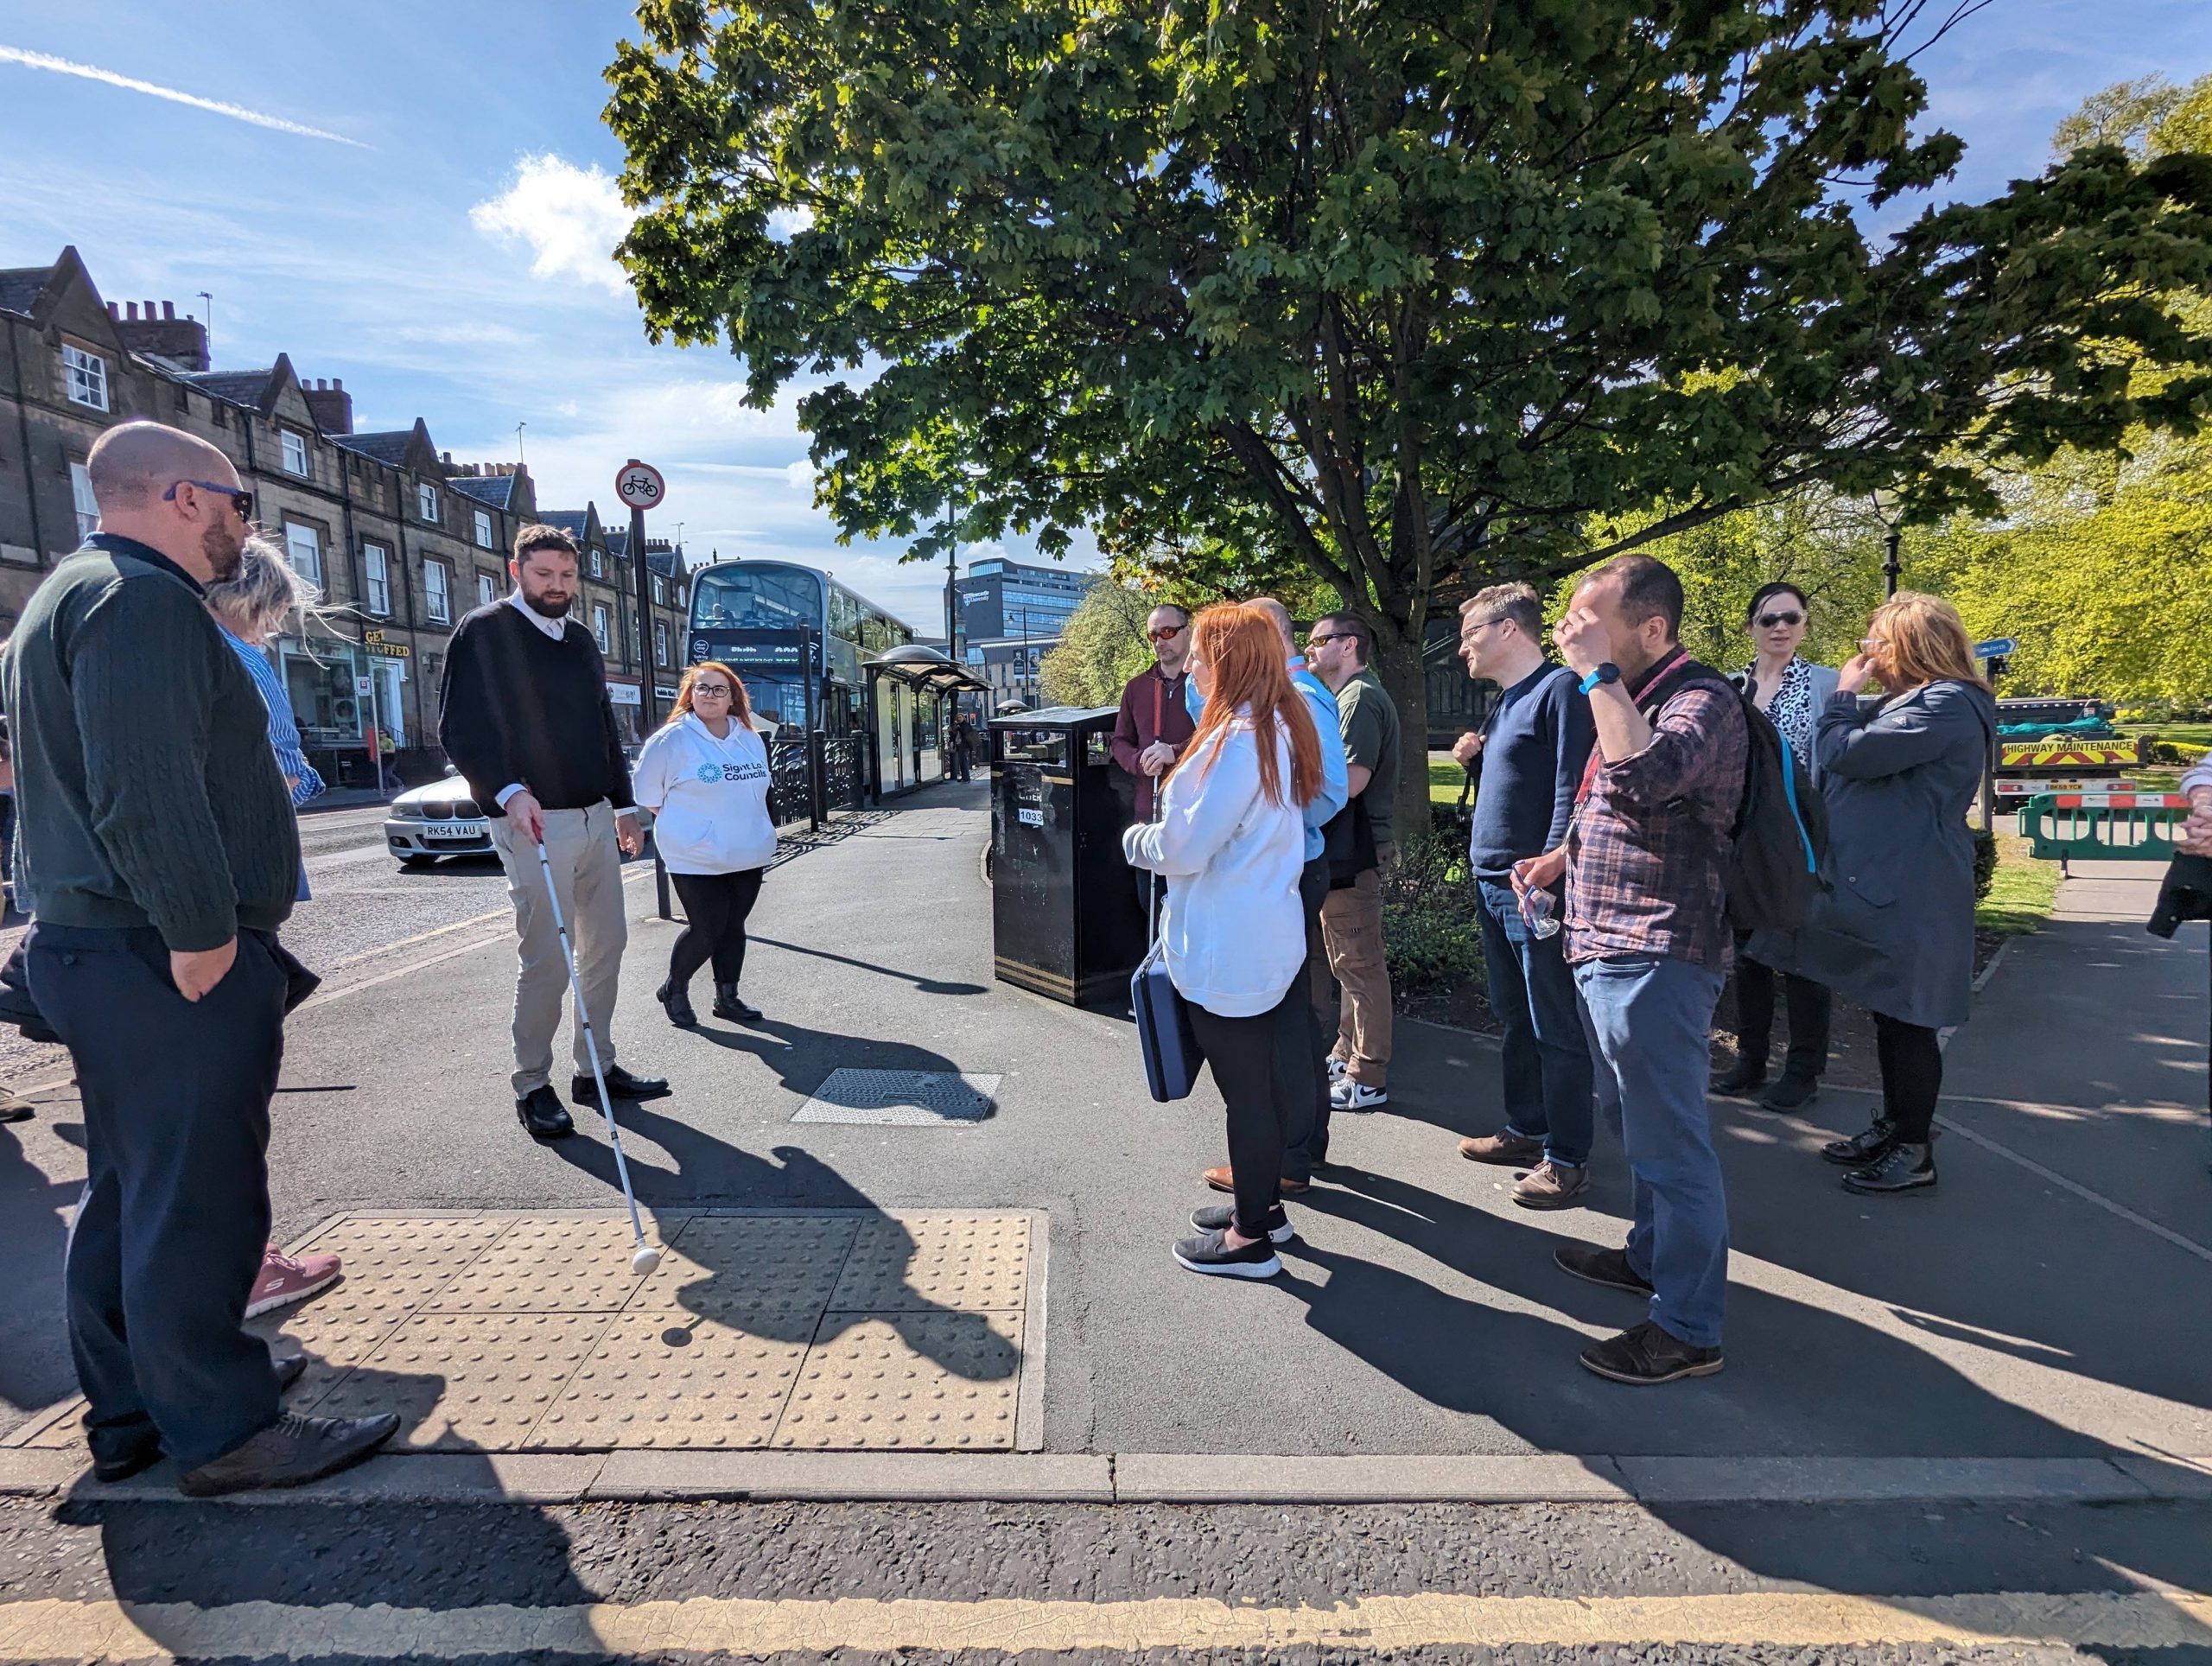 Jack, Engagement Manager for North East England, standing with officers from Newcastle City Council next to tactile markings on a pavement. He is holding his cane above the tactile marking as he talks to them.